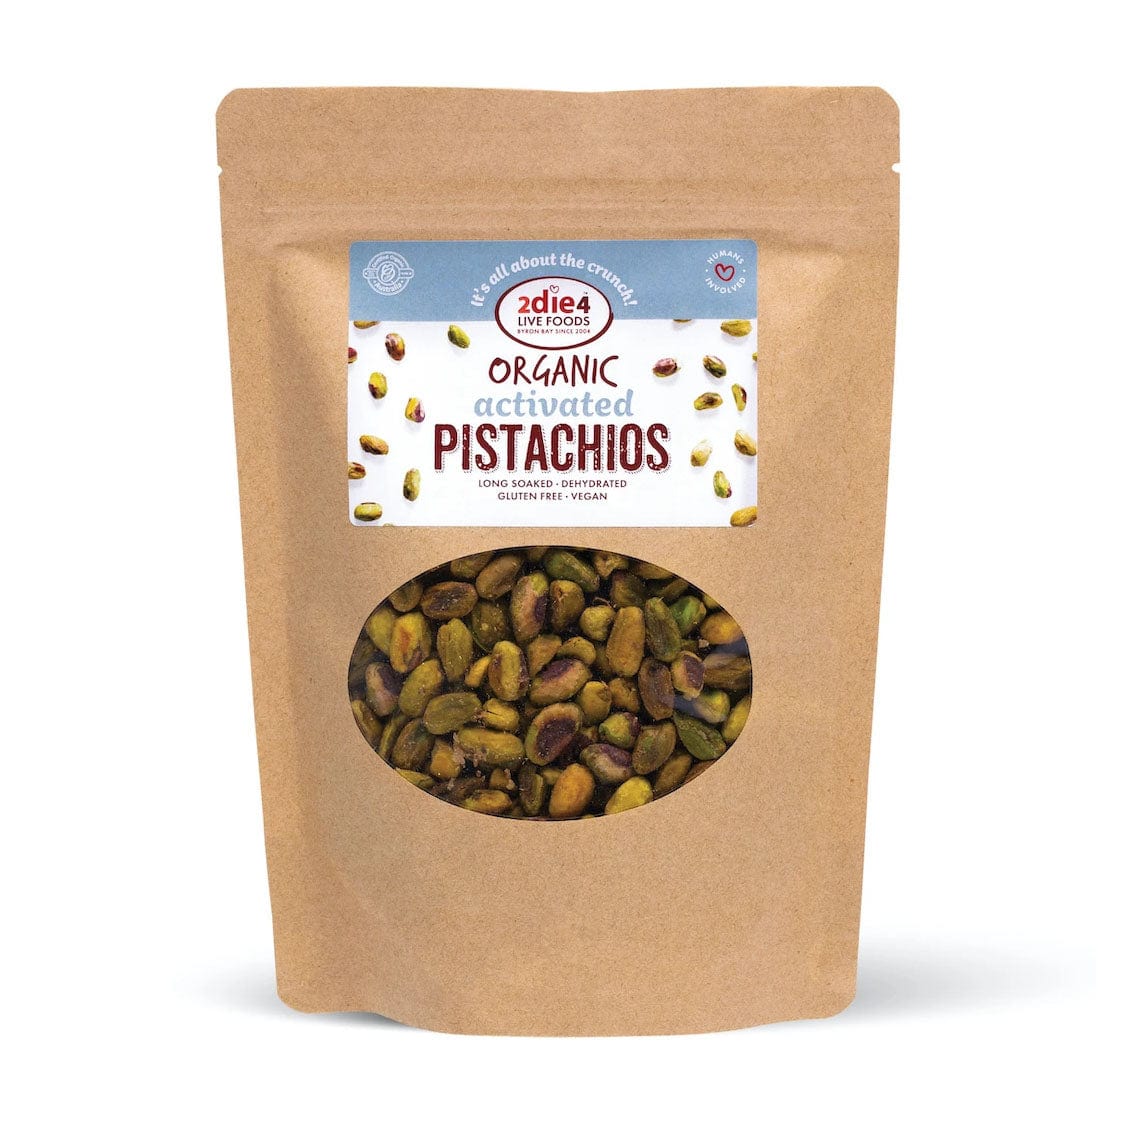 2Die4 Live Foods Organic Activated Pistachios 225g